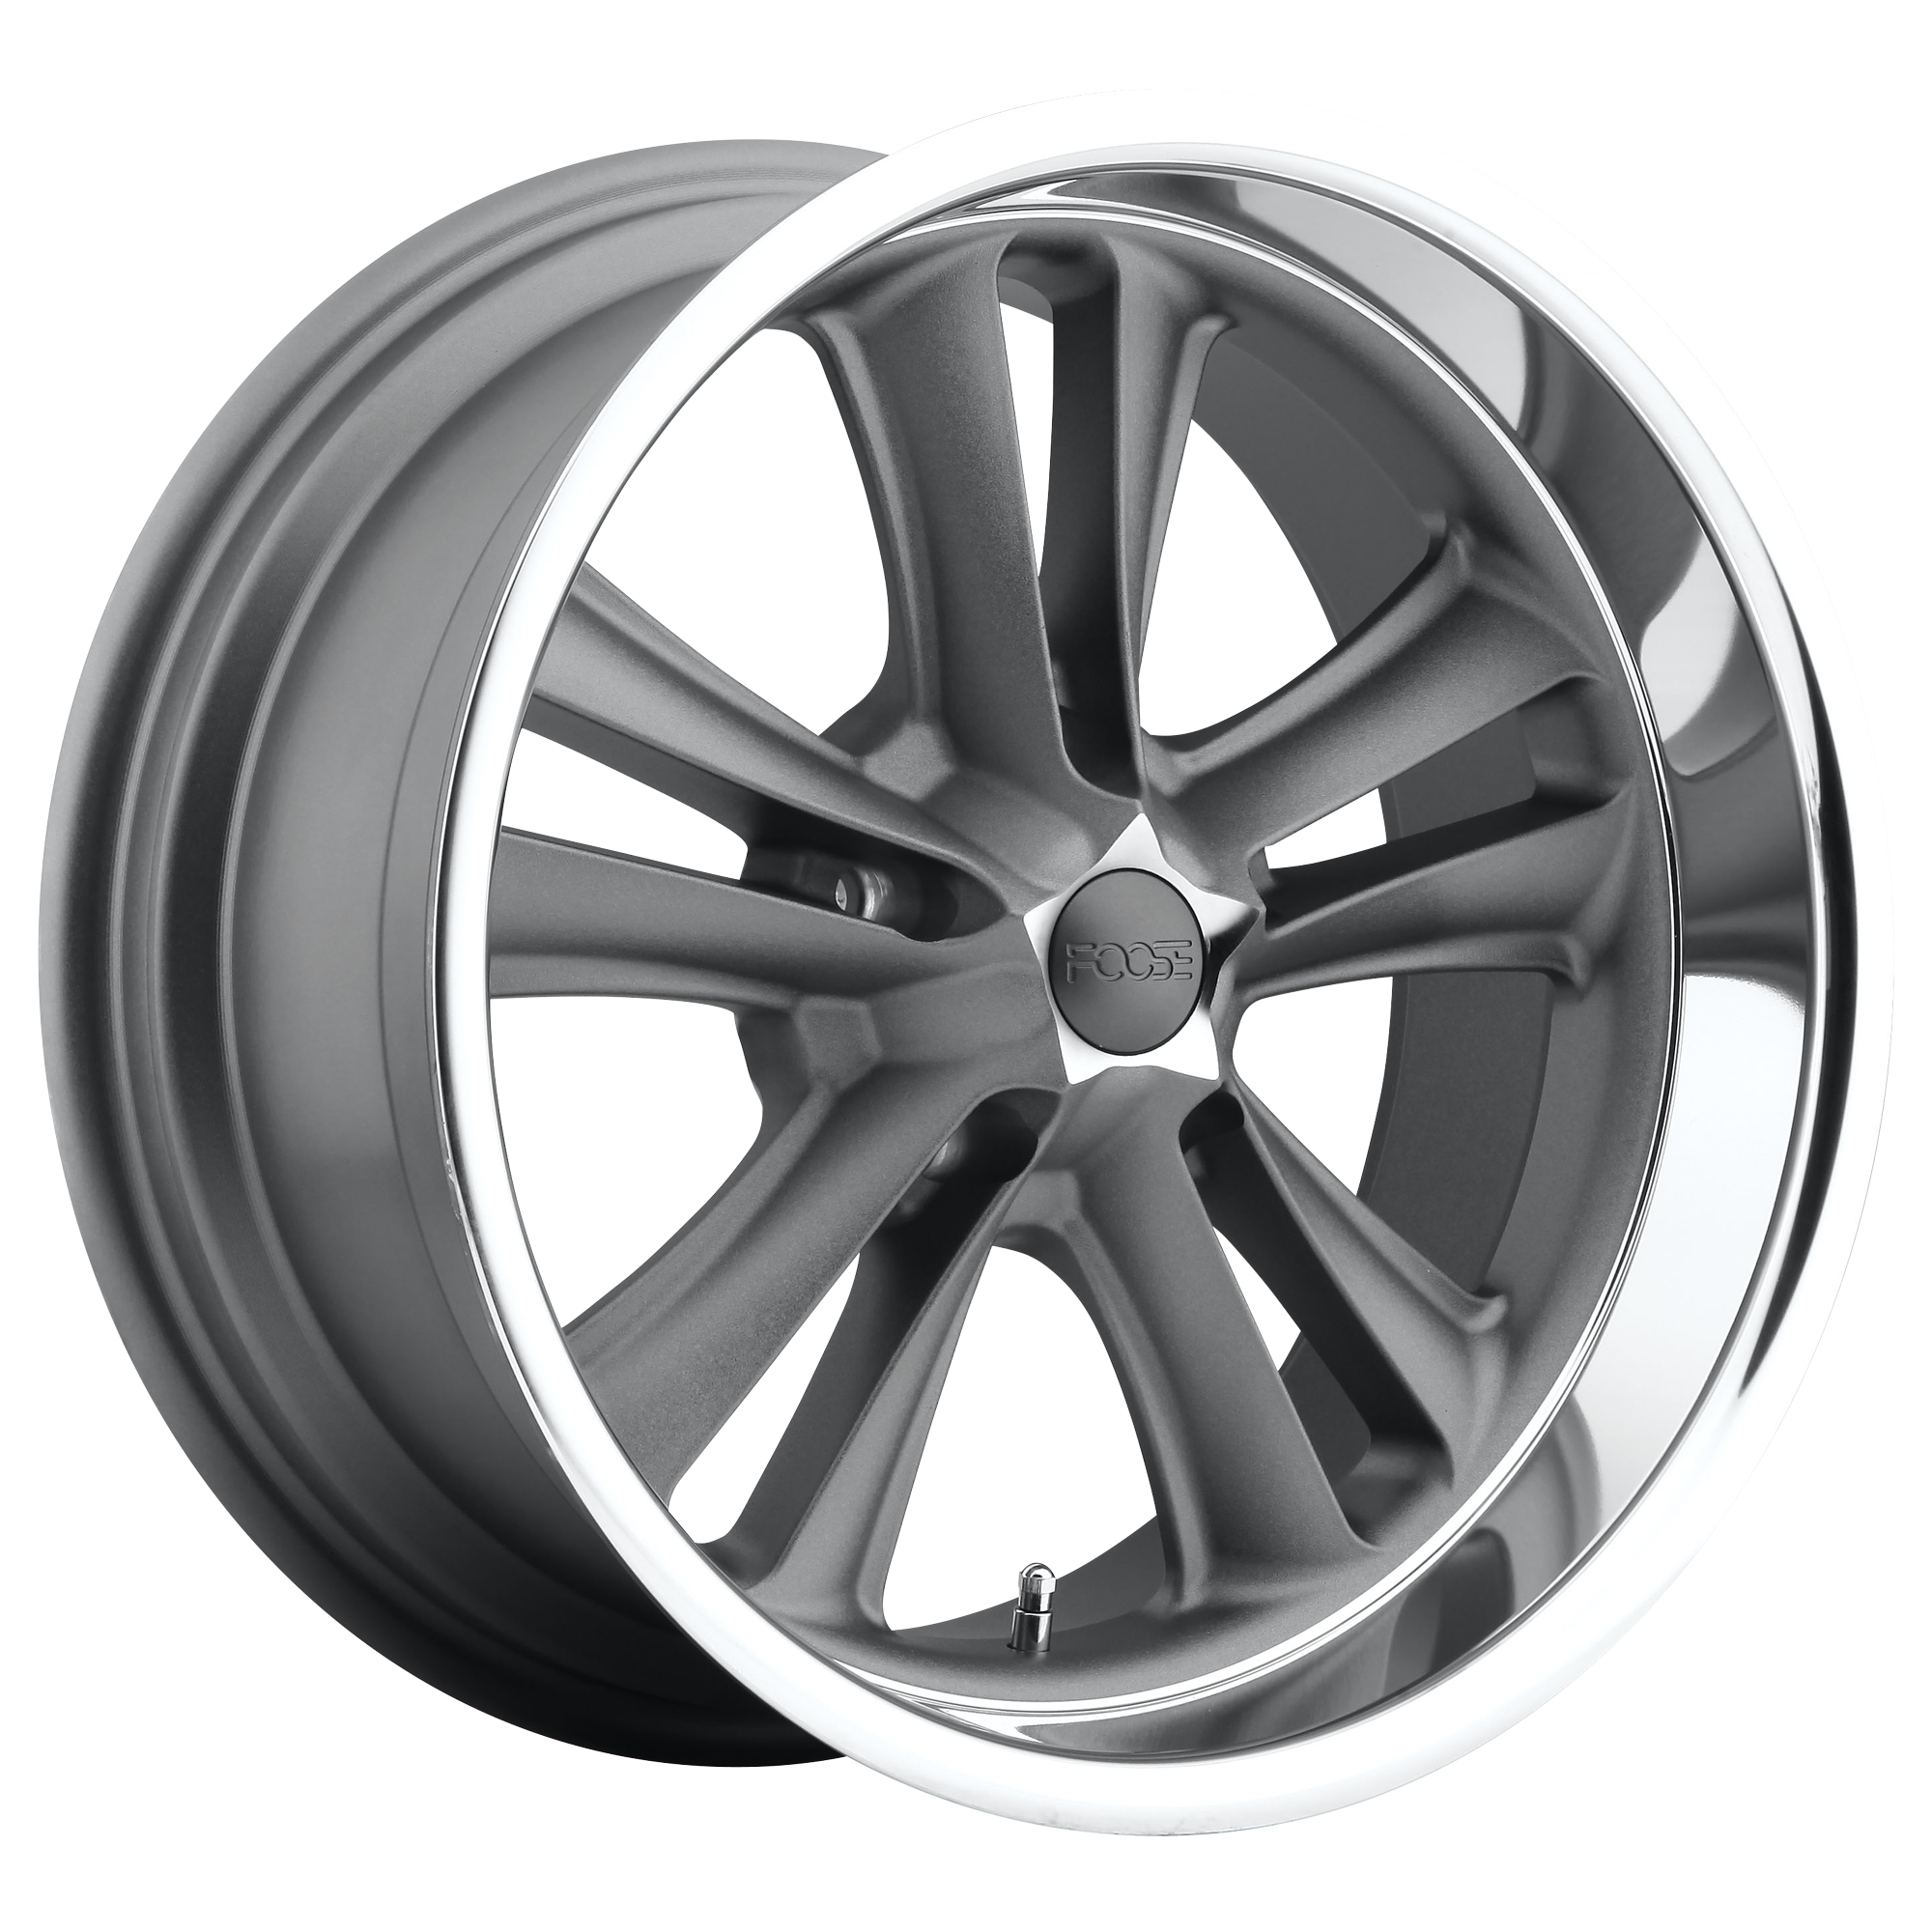 KNUCKLE 18x8 5x114.30 MATTE GUN METAL MACHINED (1 mm) - Tires and Engine Performance